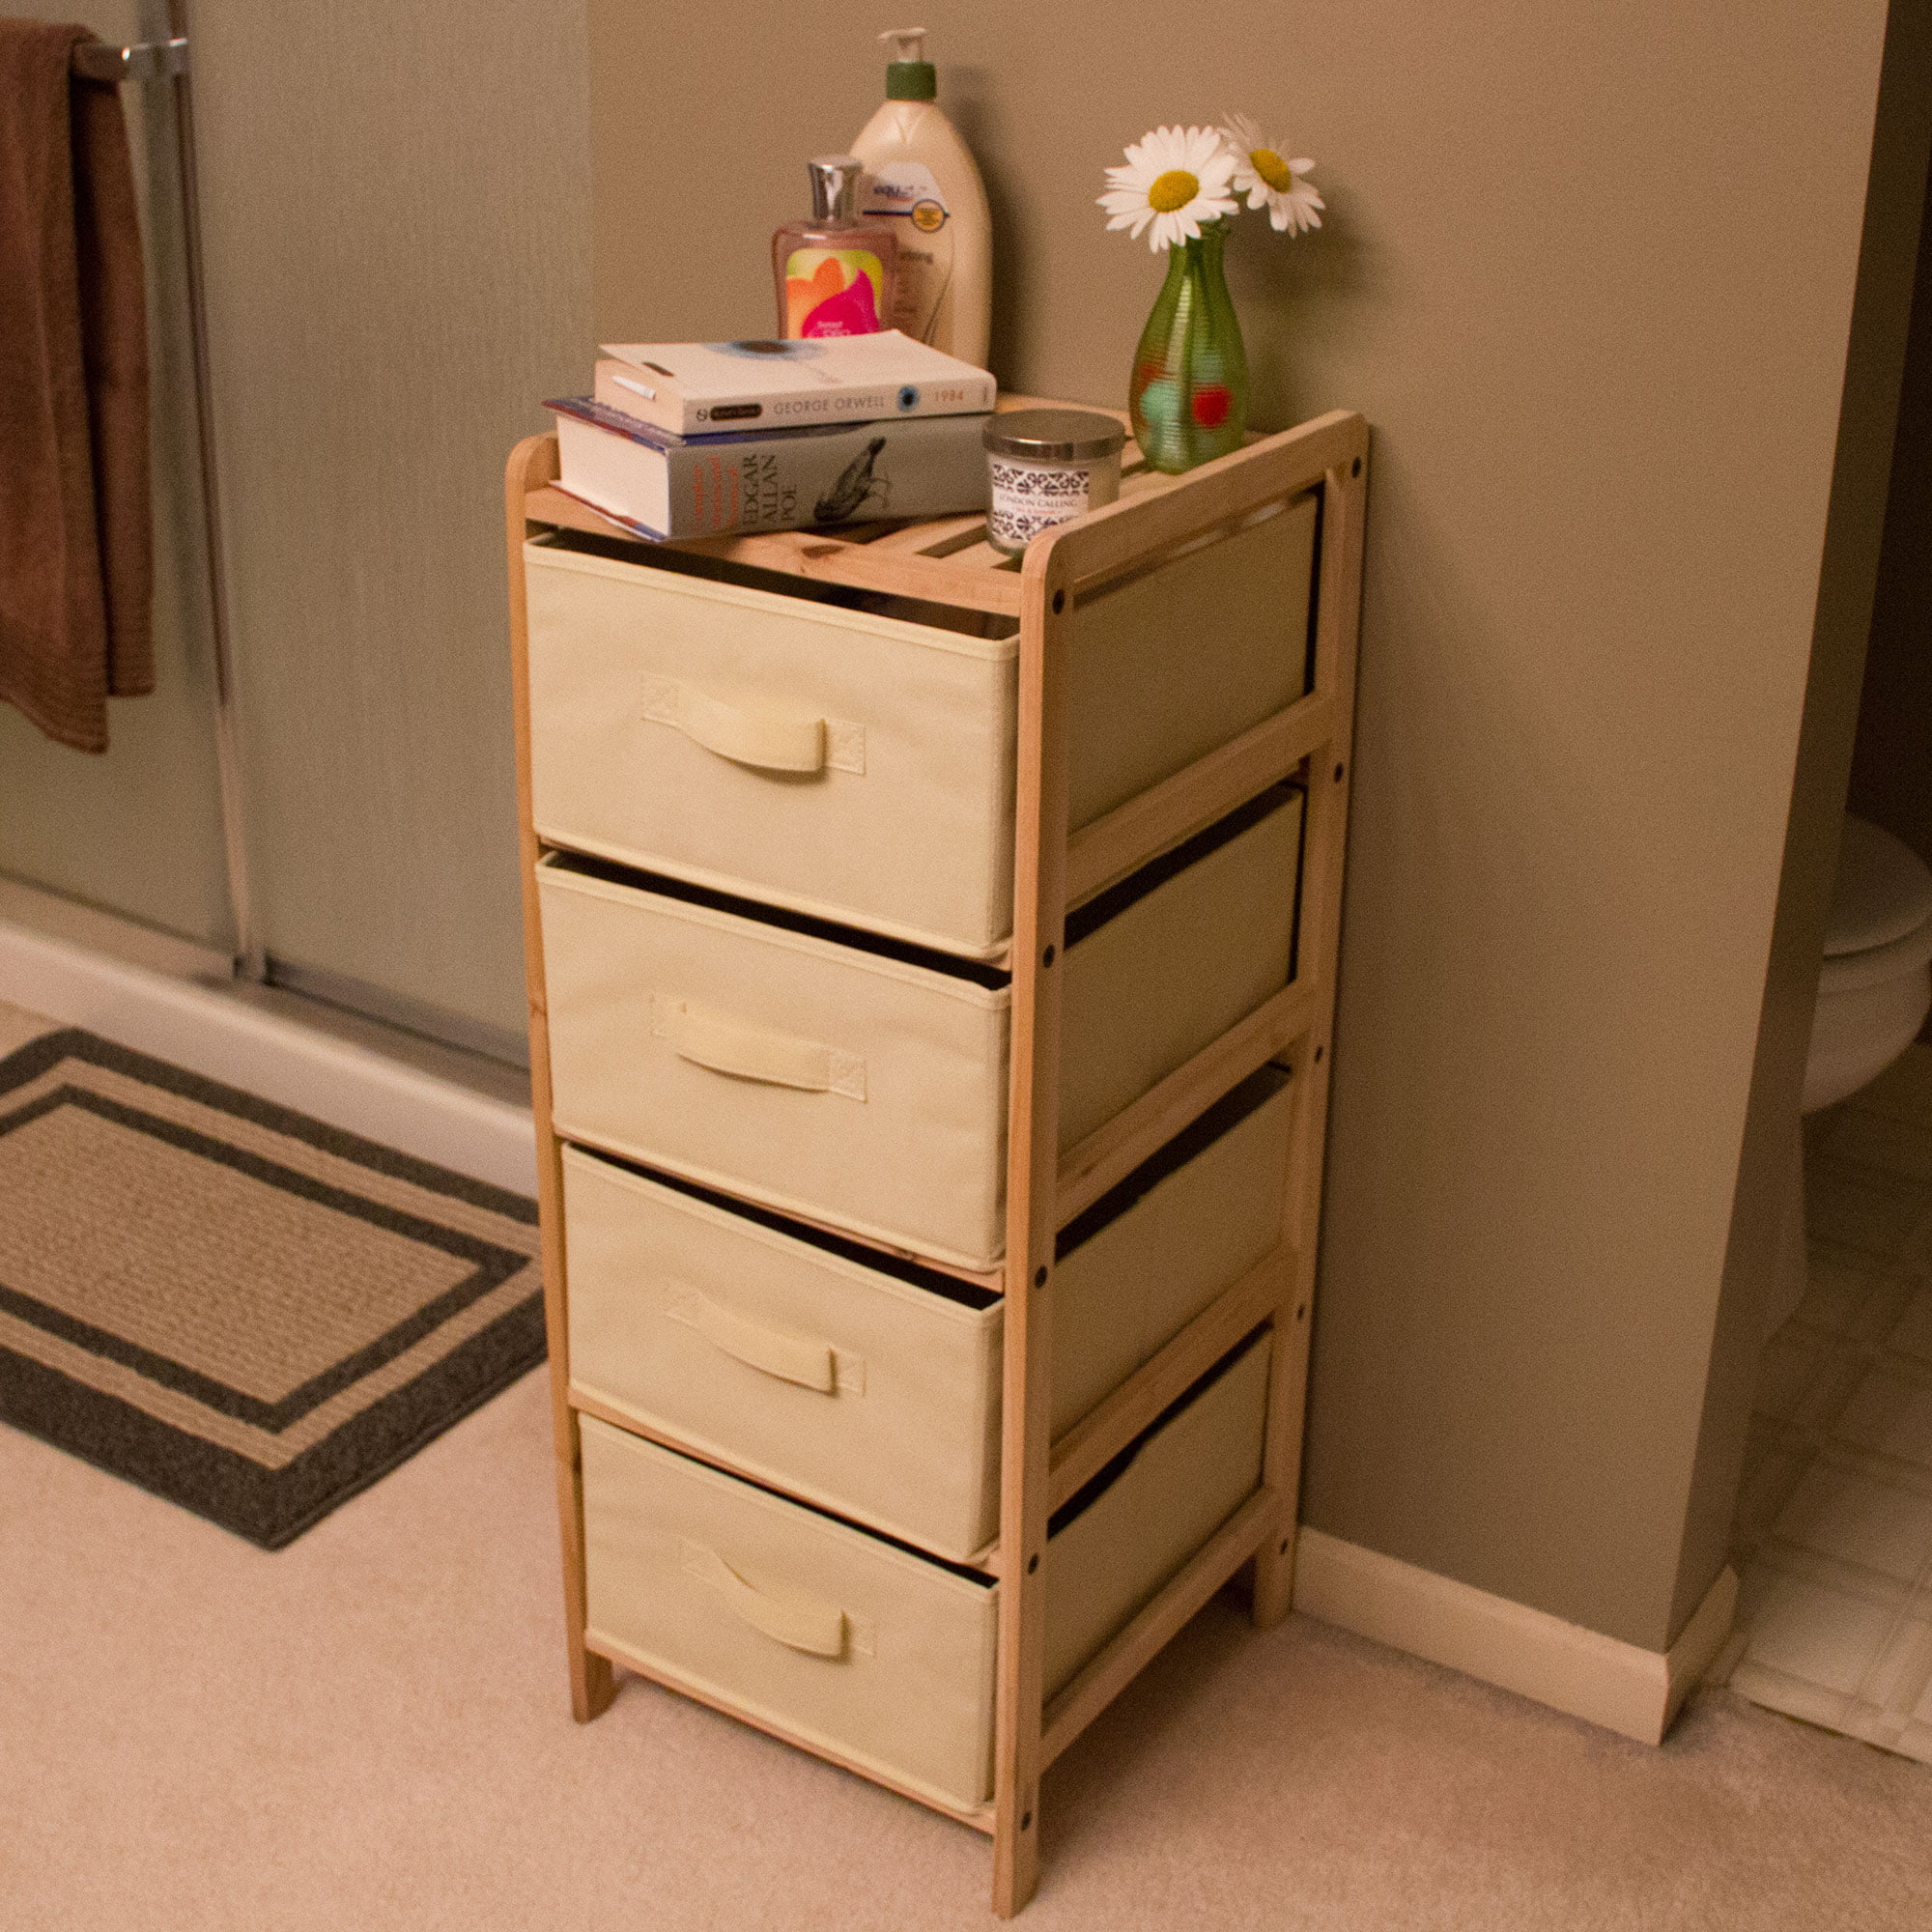 Organization Drawers With Natural Wood Shelf And Four Fabric Storage